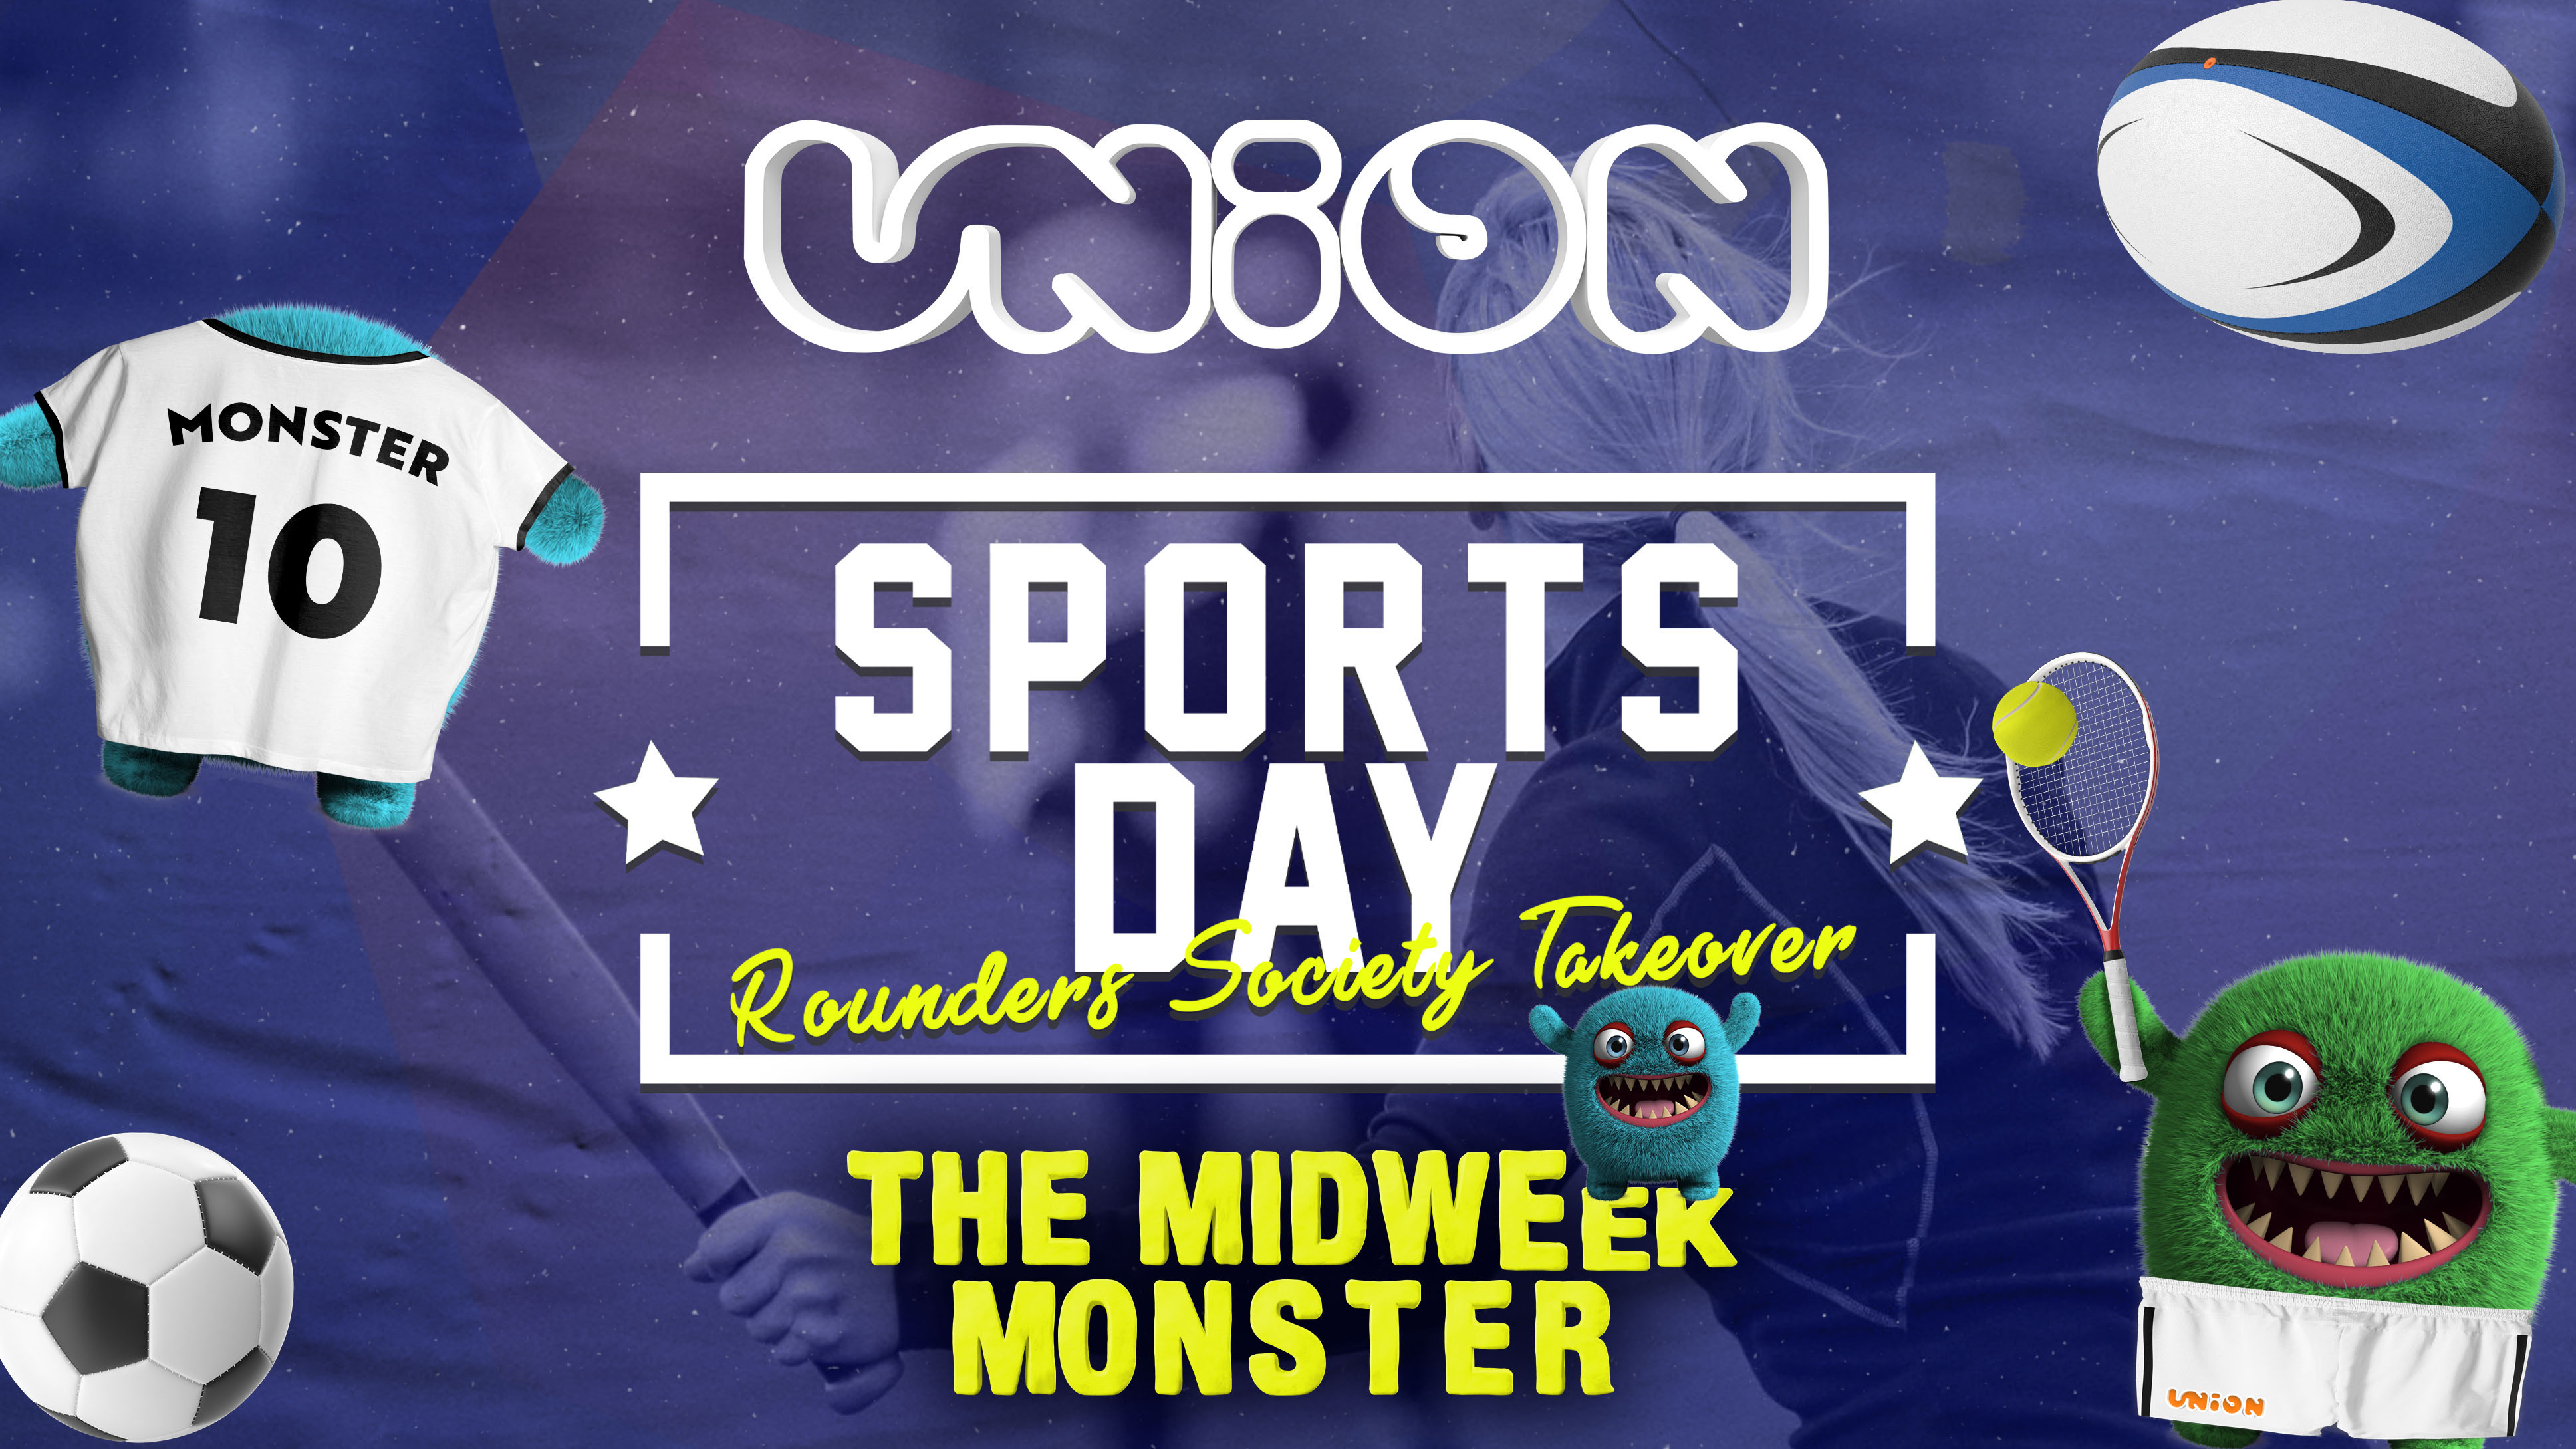 UNION TUESDAY’S PRESENTS SPORTS DAY HOSTED BY ROUNDERS